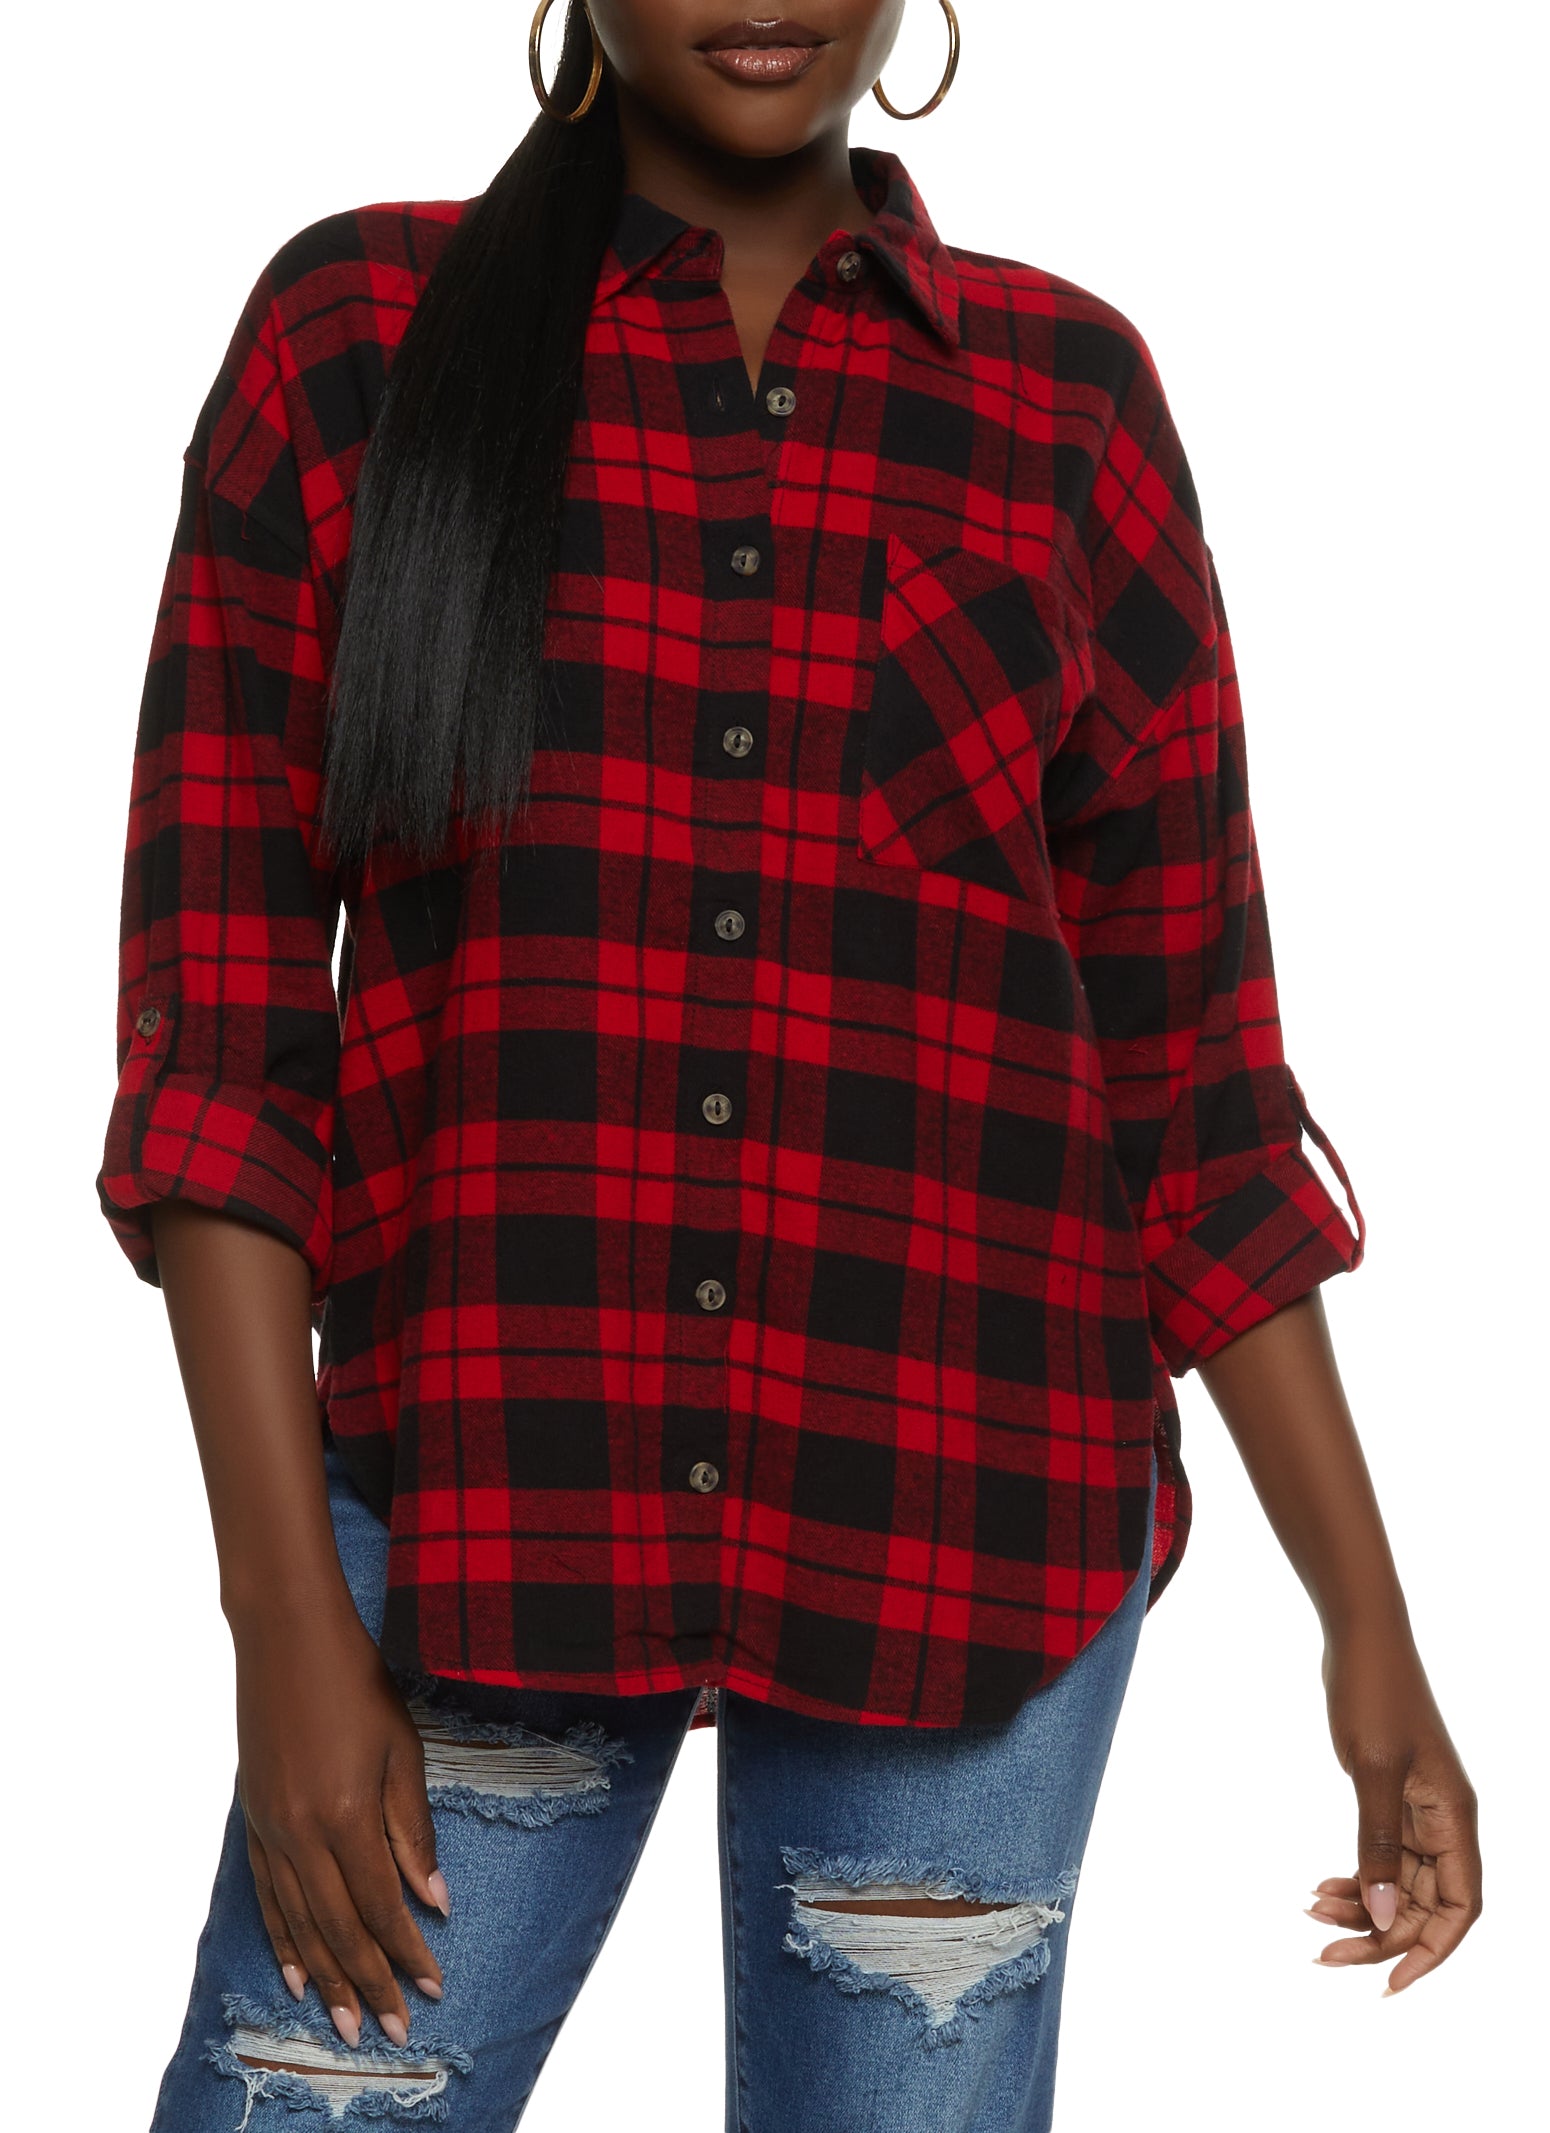 LUCKY BRAND WOMENS XS PLAID FLANNEL SHIRT LONG SLEEVE MULTICOLOR RAYON NWT